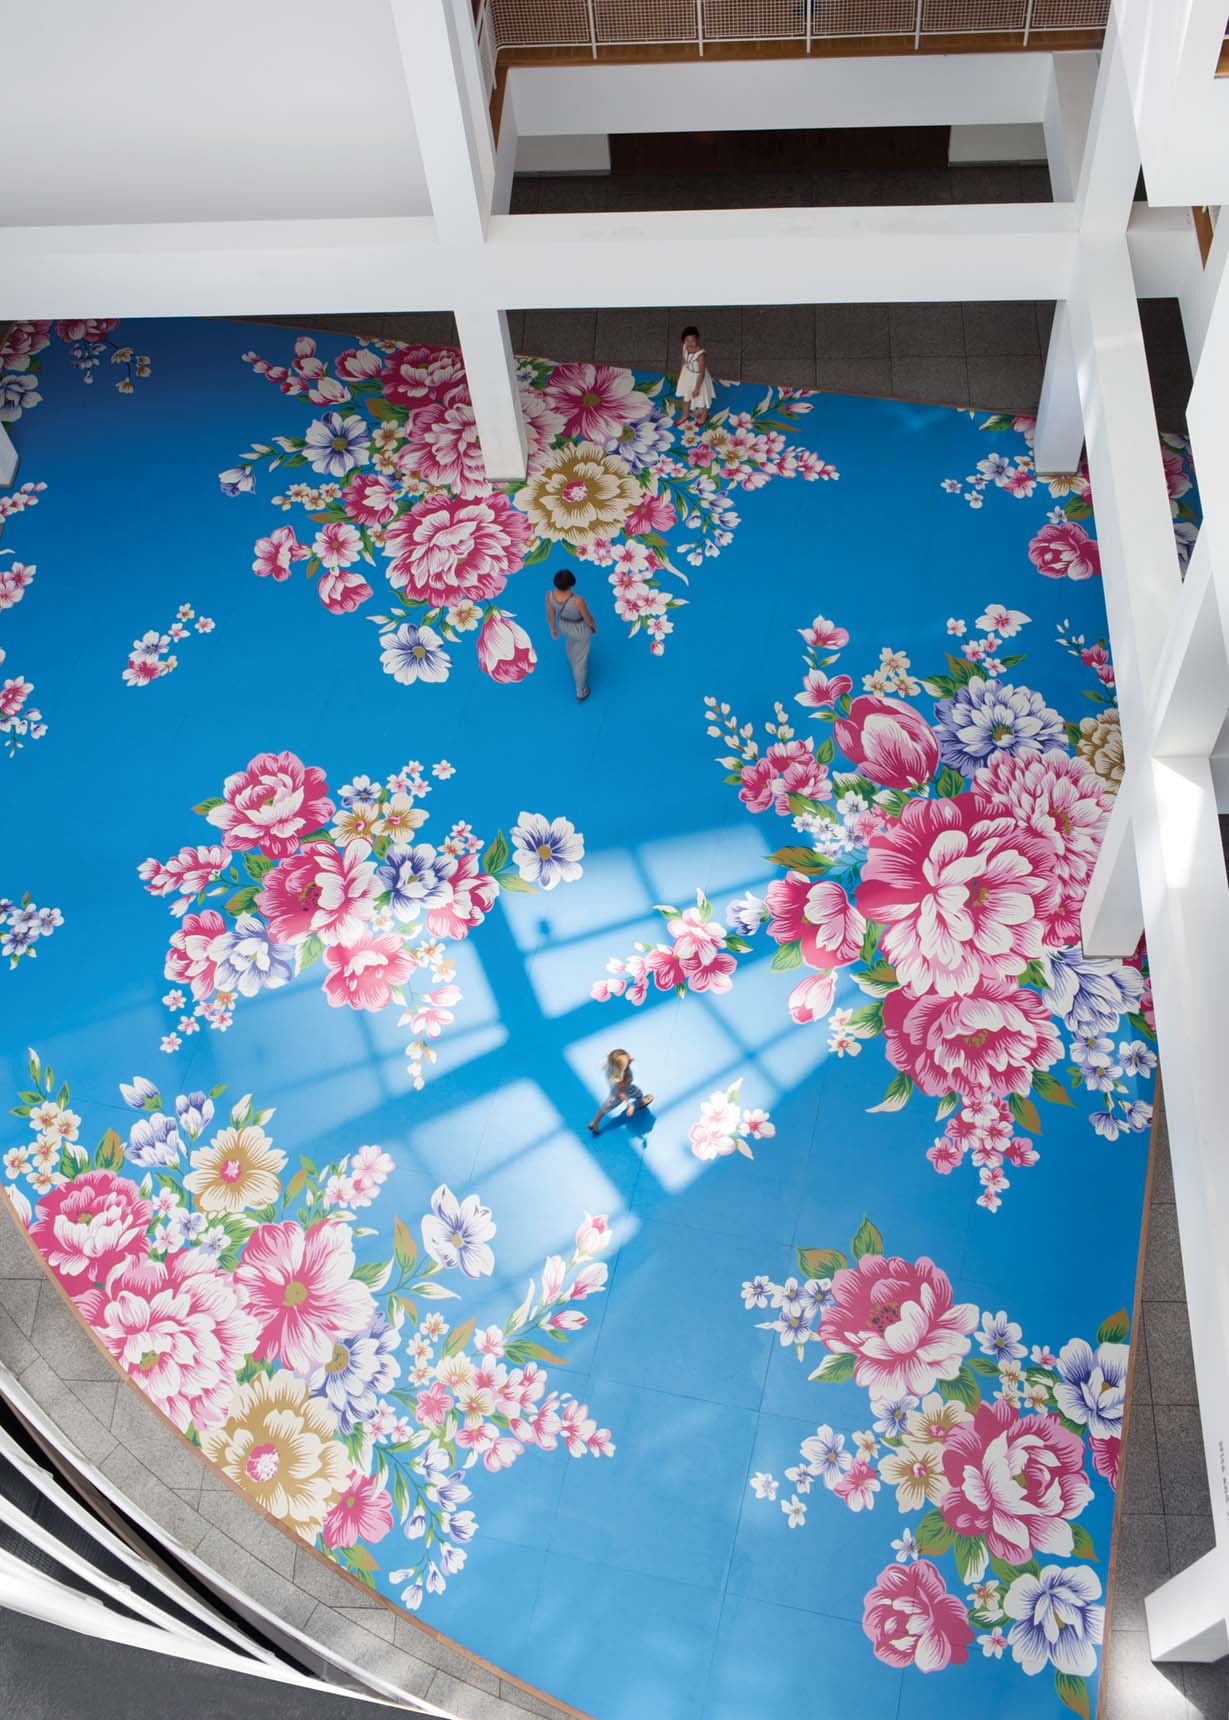 Overhead view of the floral floor painting by artist Michael Lin, titled Utah Sky 2065-40 (blue curve), at the High Museum of Art